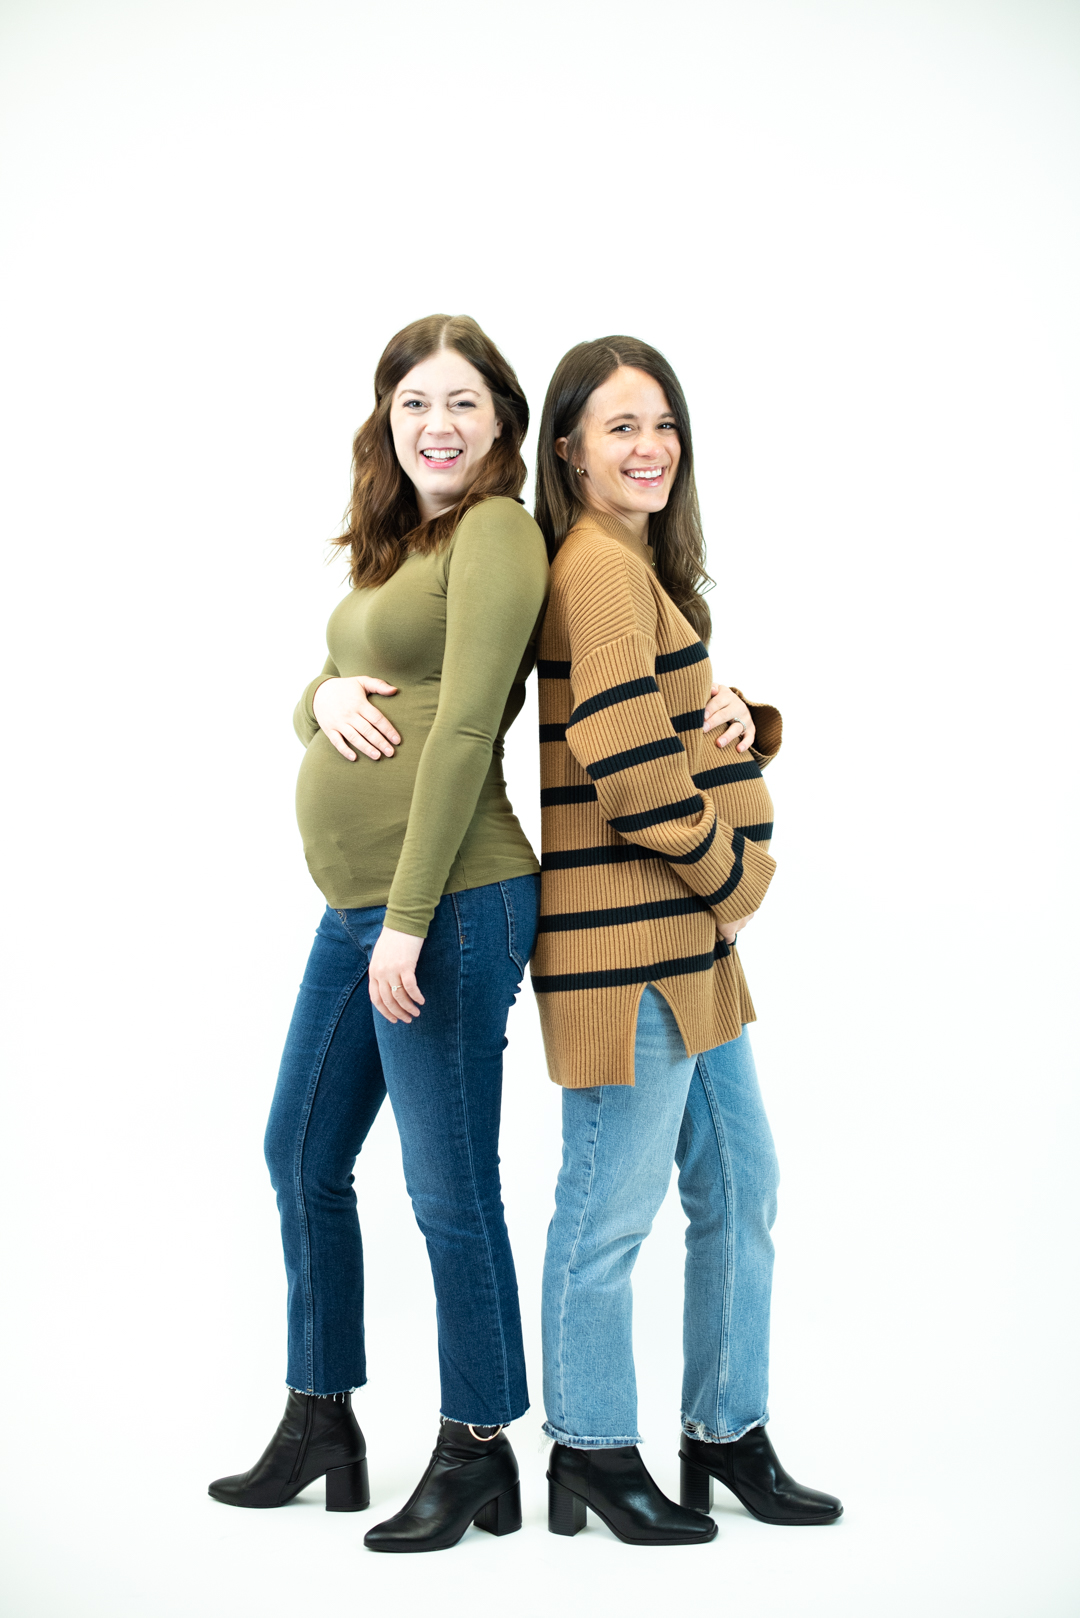 MATERNITY JEANS REVIEW: 13 PAIRS OF MATERNITY JEANS AND WHAT WORKED AND  DIDN'T WORK ABOUT EACH